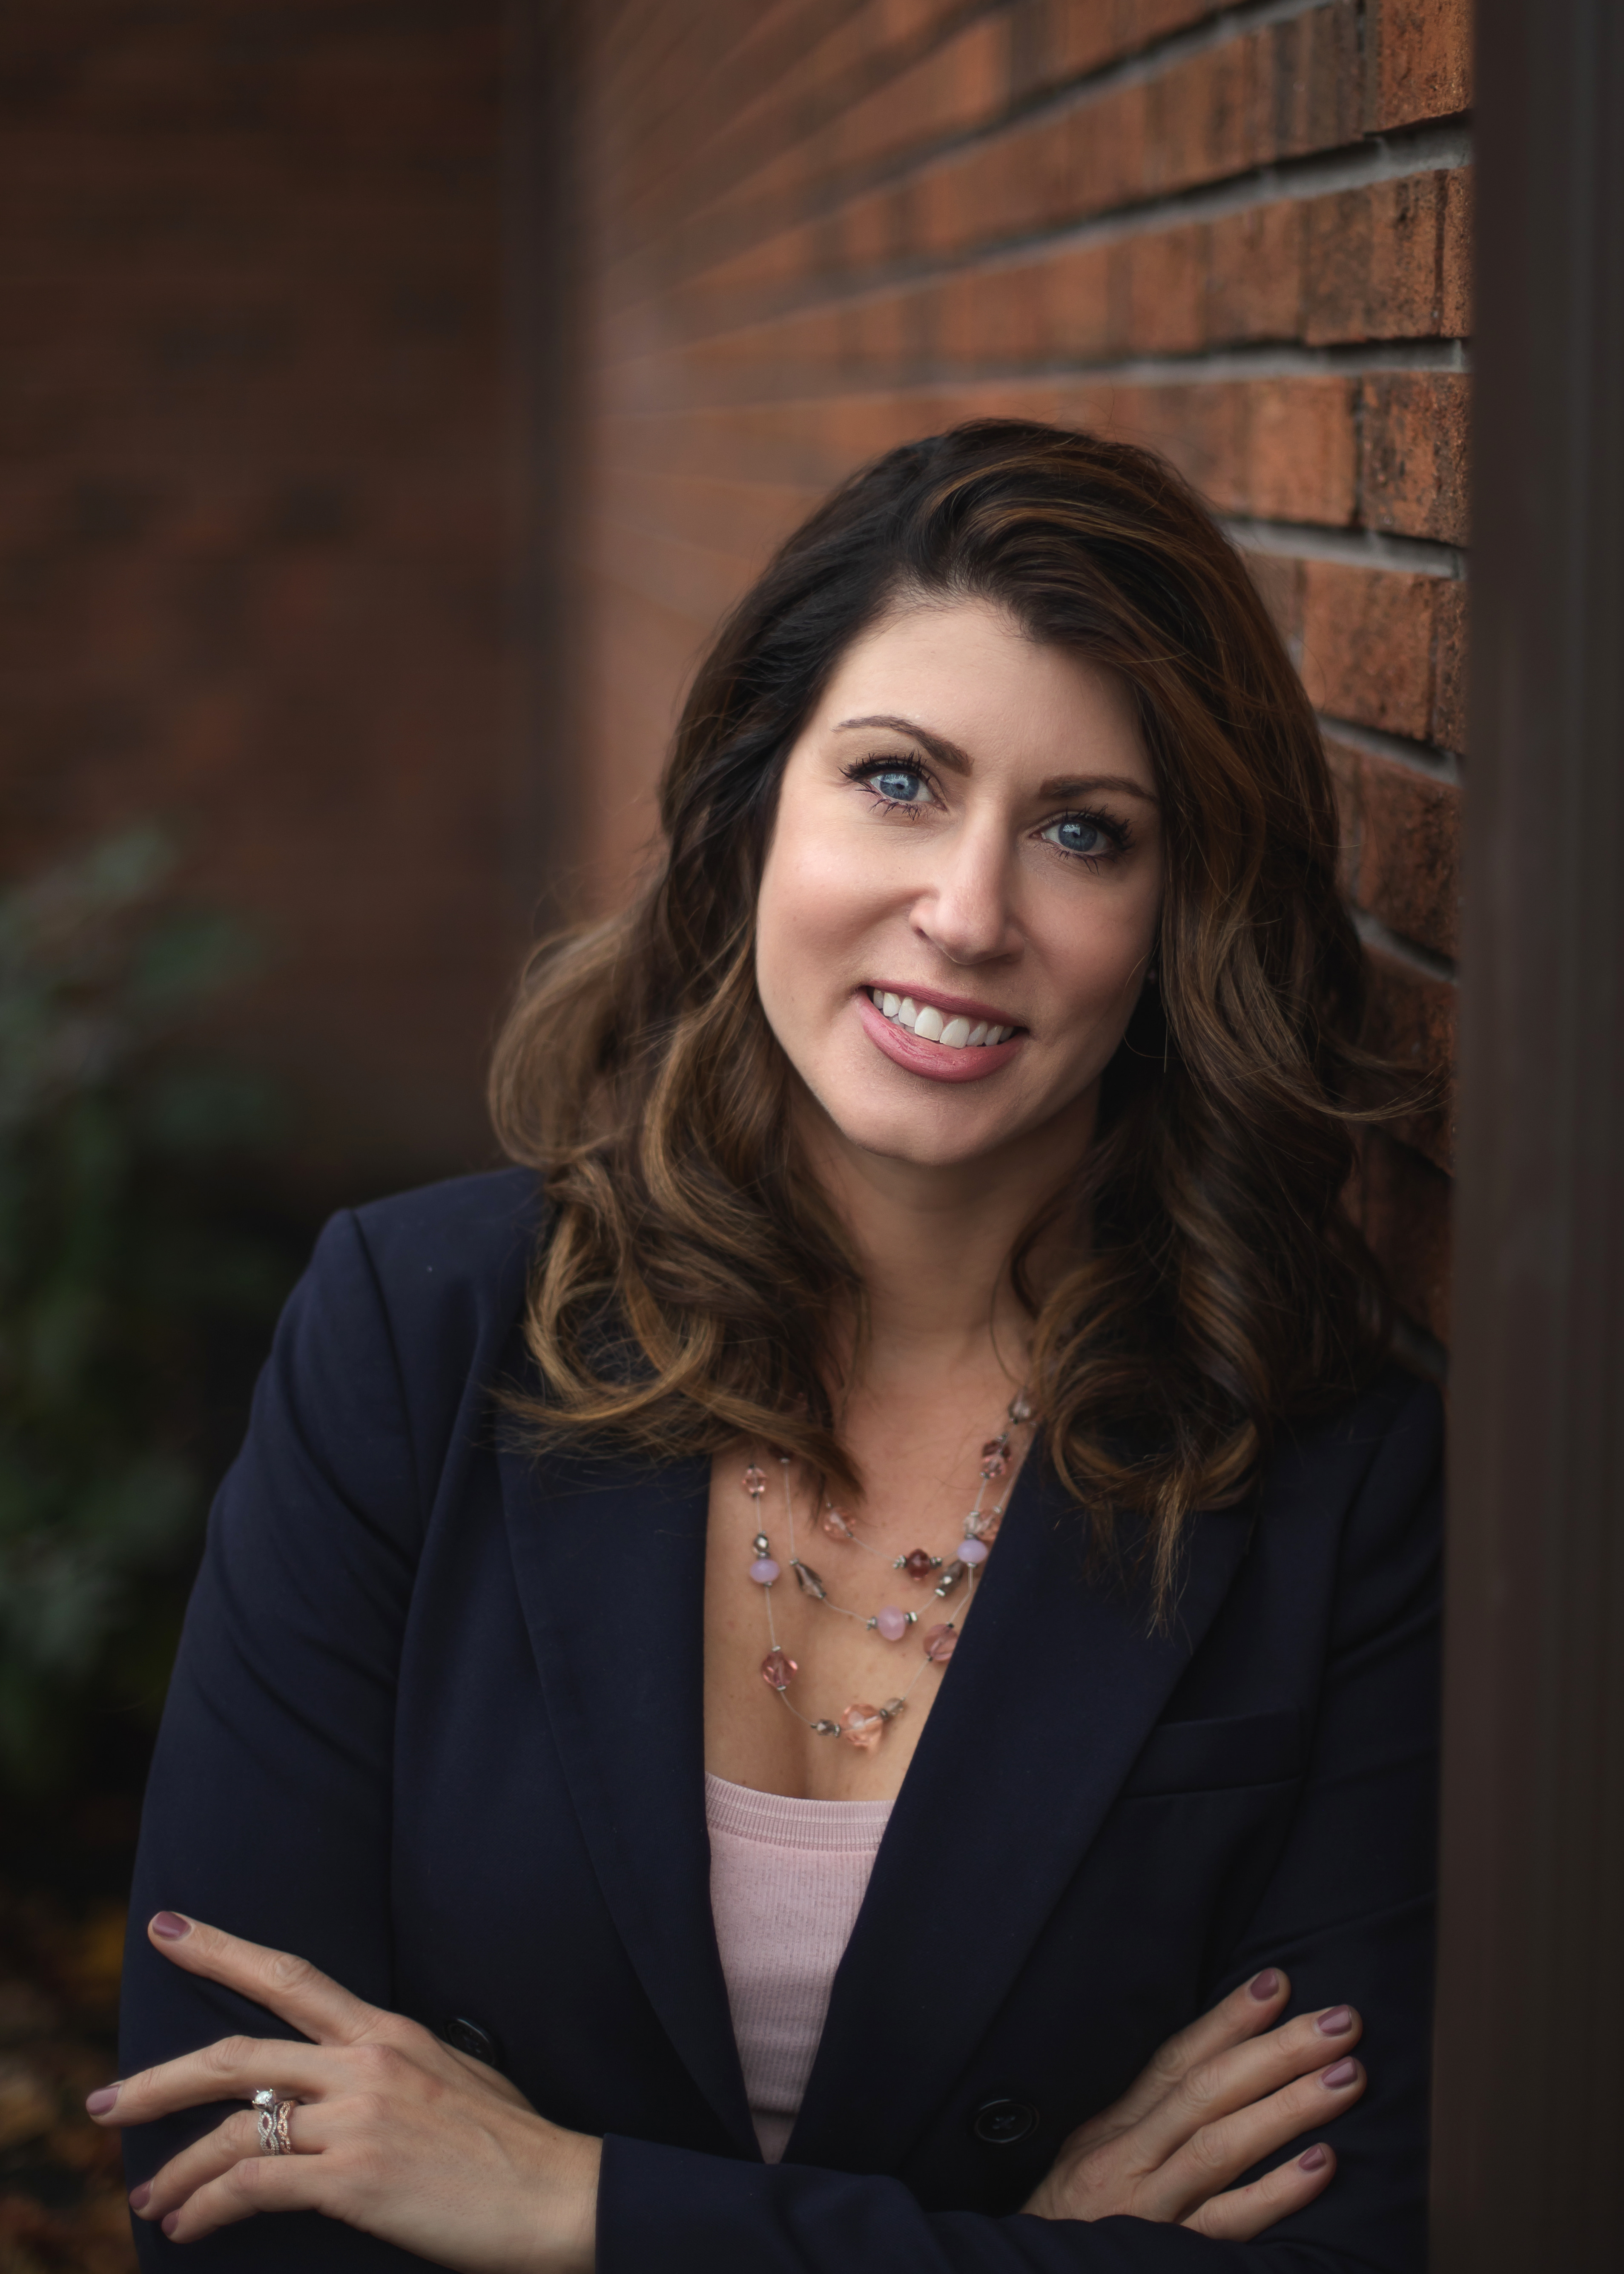 Interview with Rachel Corcoran, Real Estate Salesperson